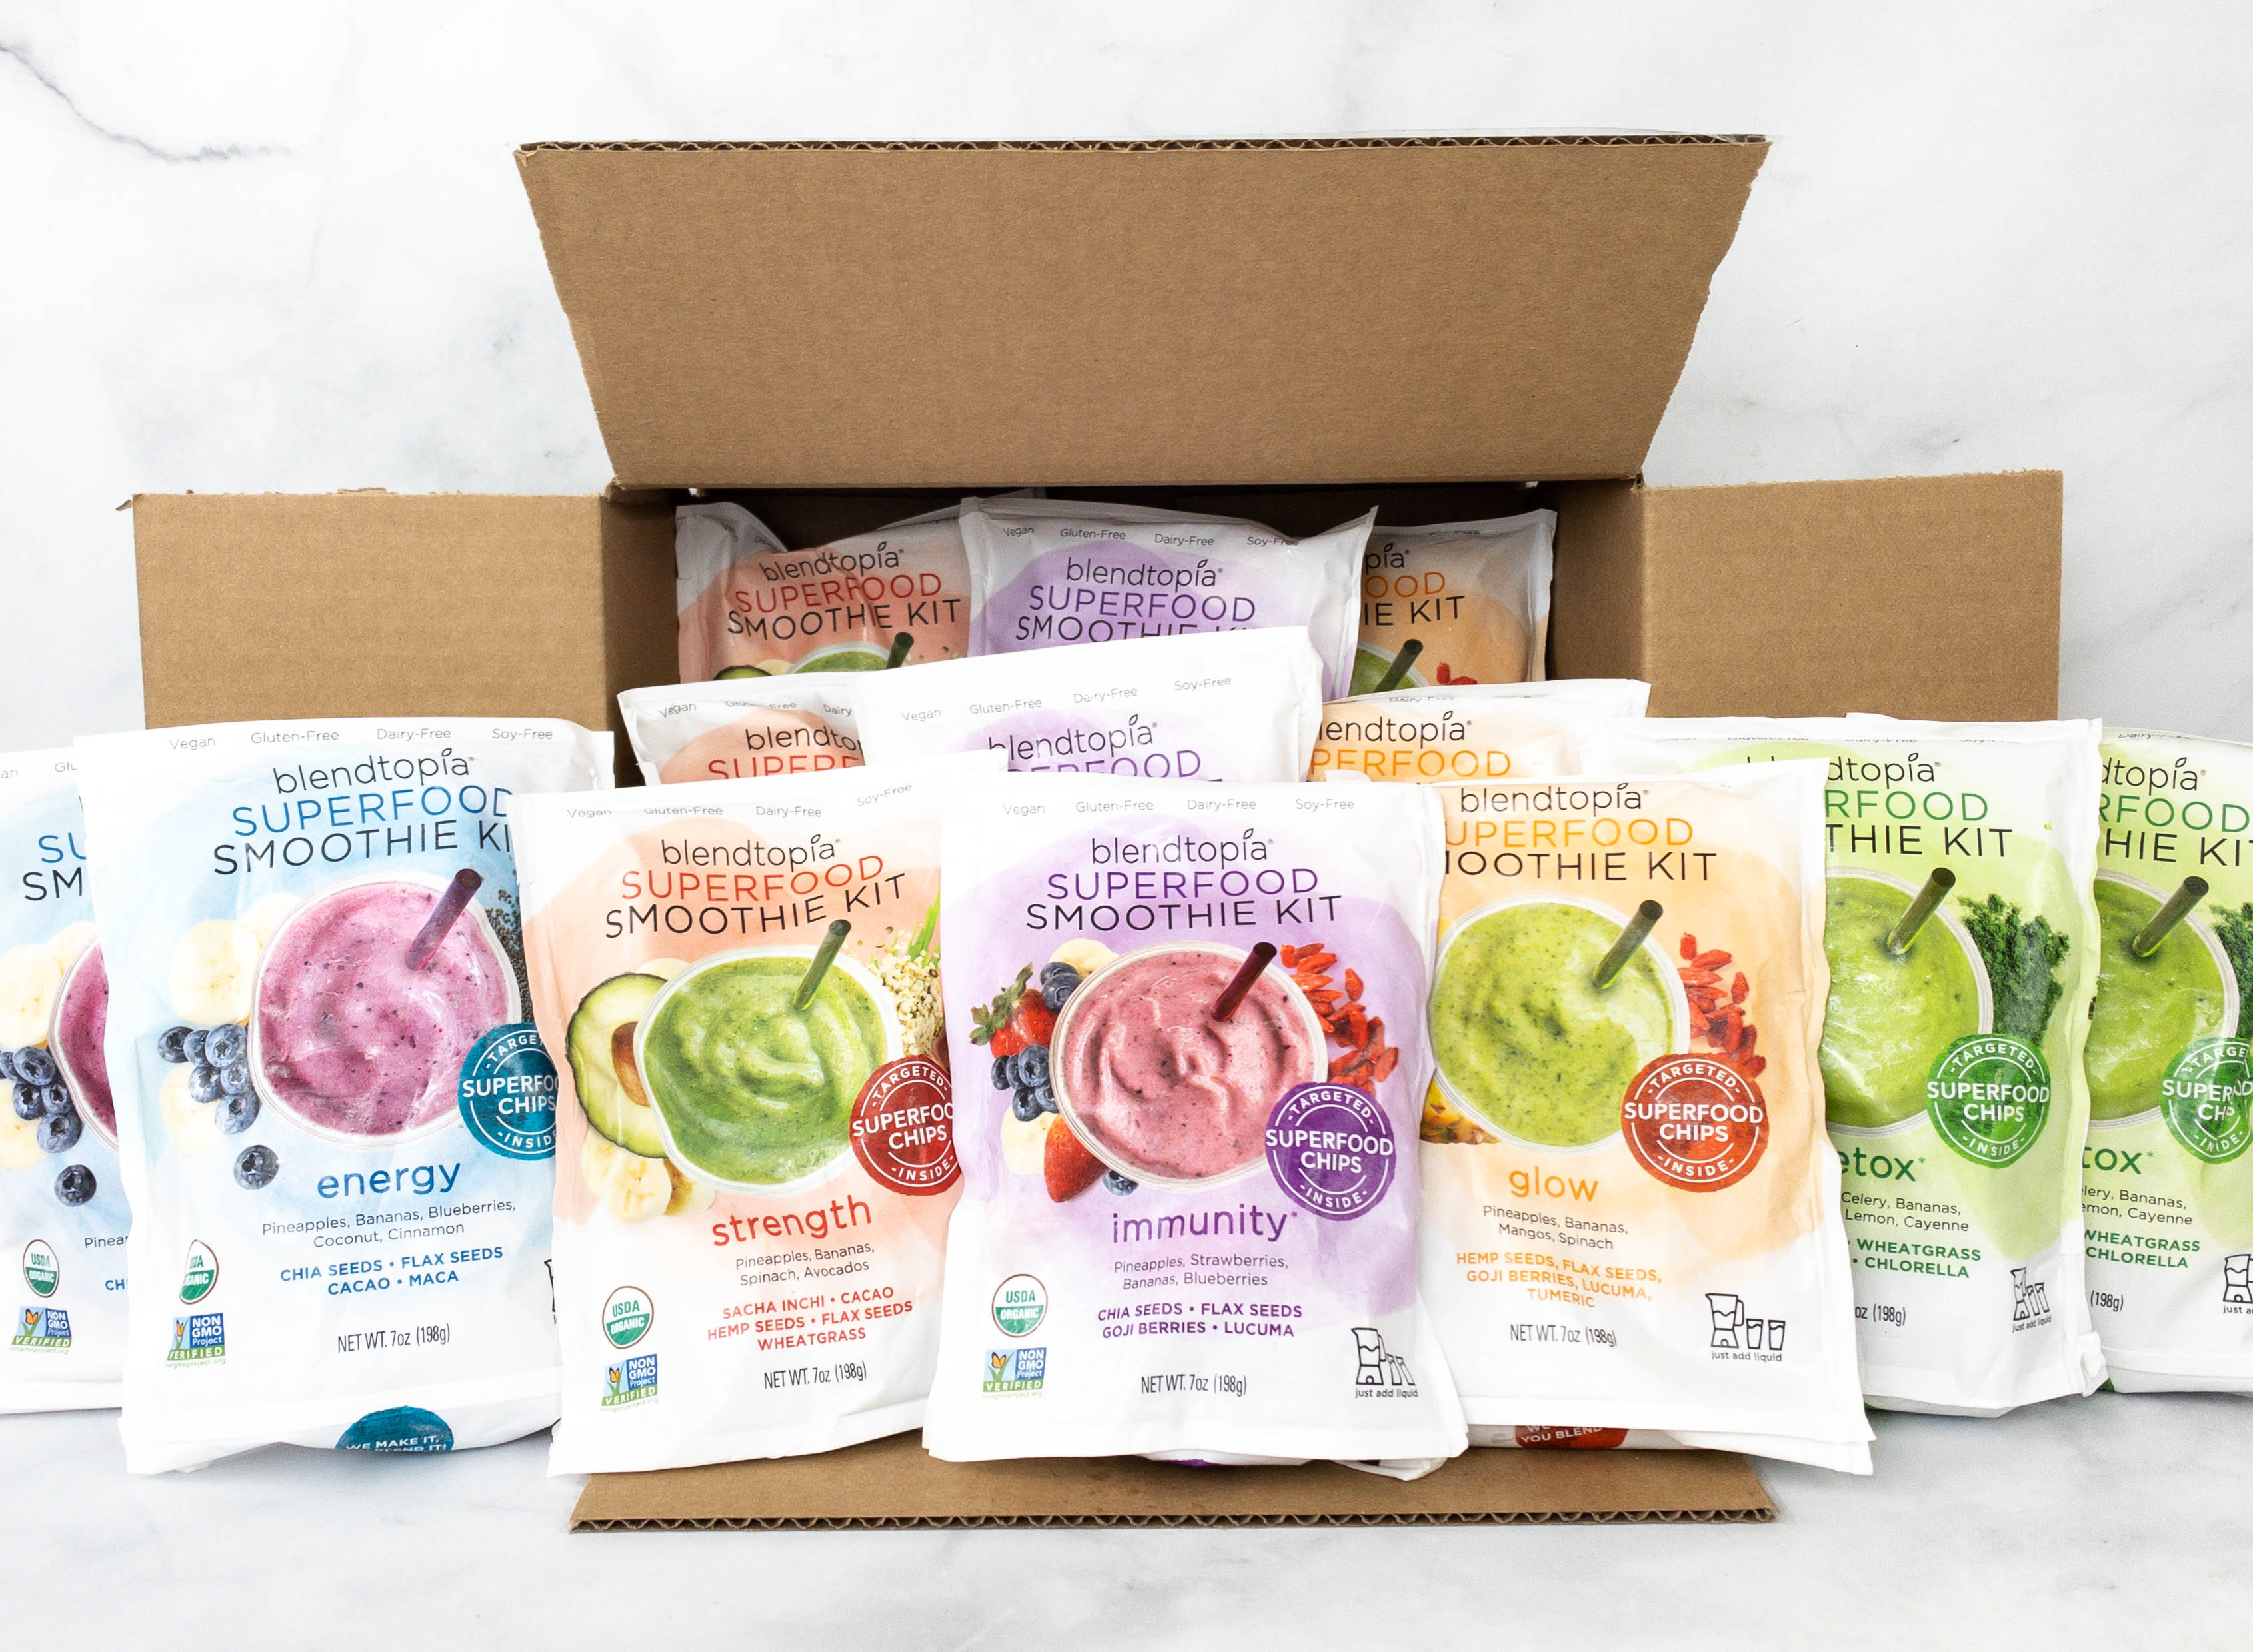 https://hellosubscription.com/wp-content/uploads/2021/03/blendtopia-superfood-smoothie-kit-3.jpg?quality=90&strip=all